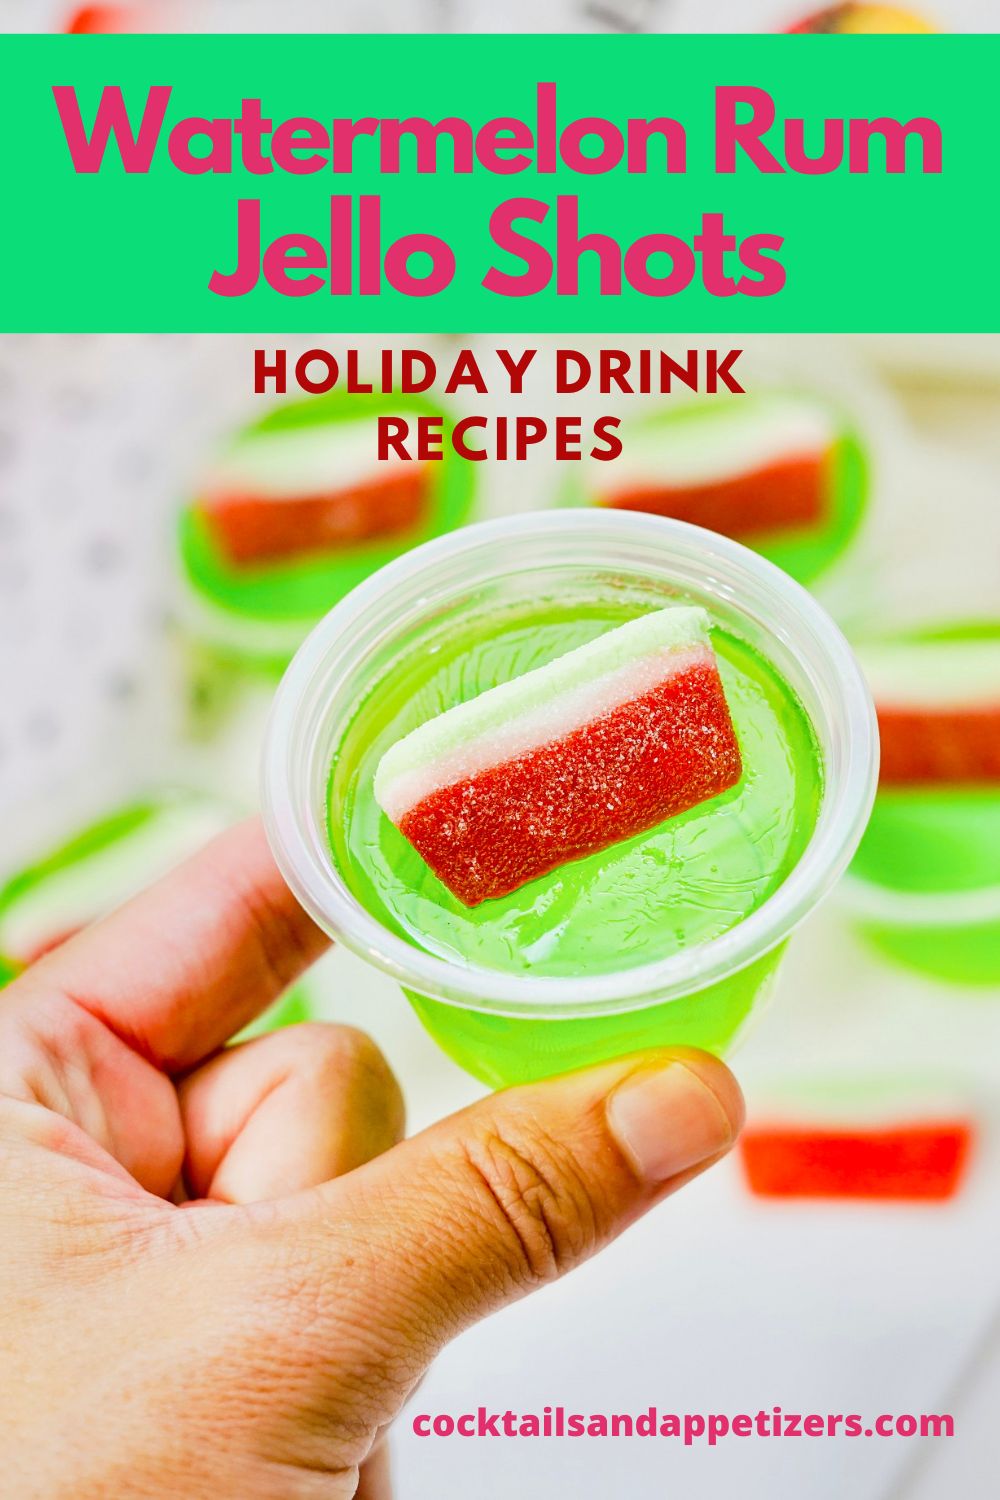 Jello shots with Malibu Rum in a condiment cup with a candy garnish.